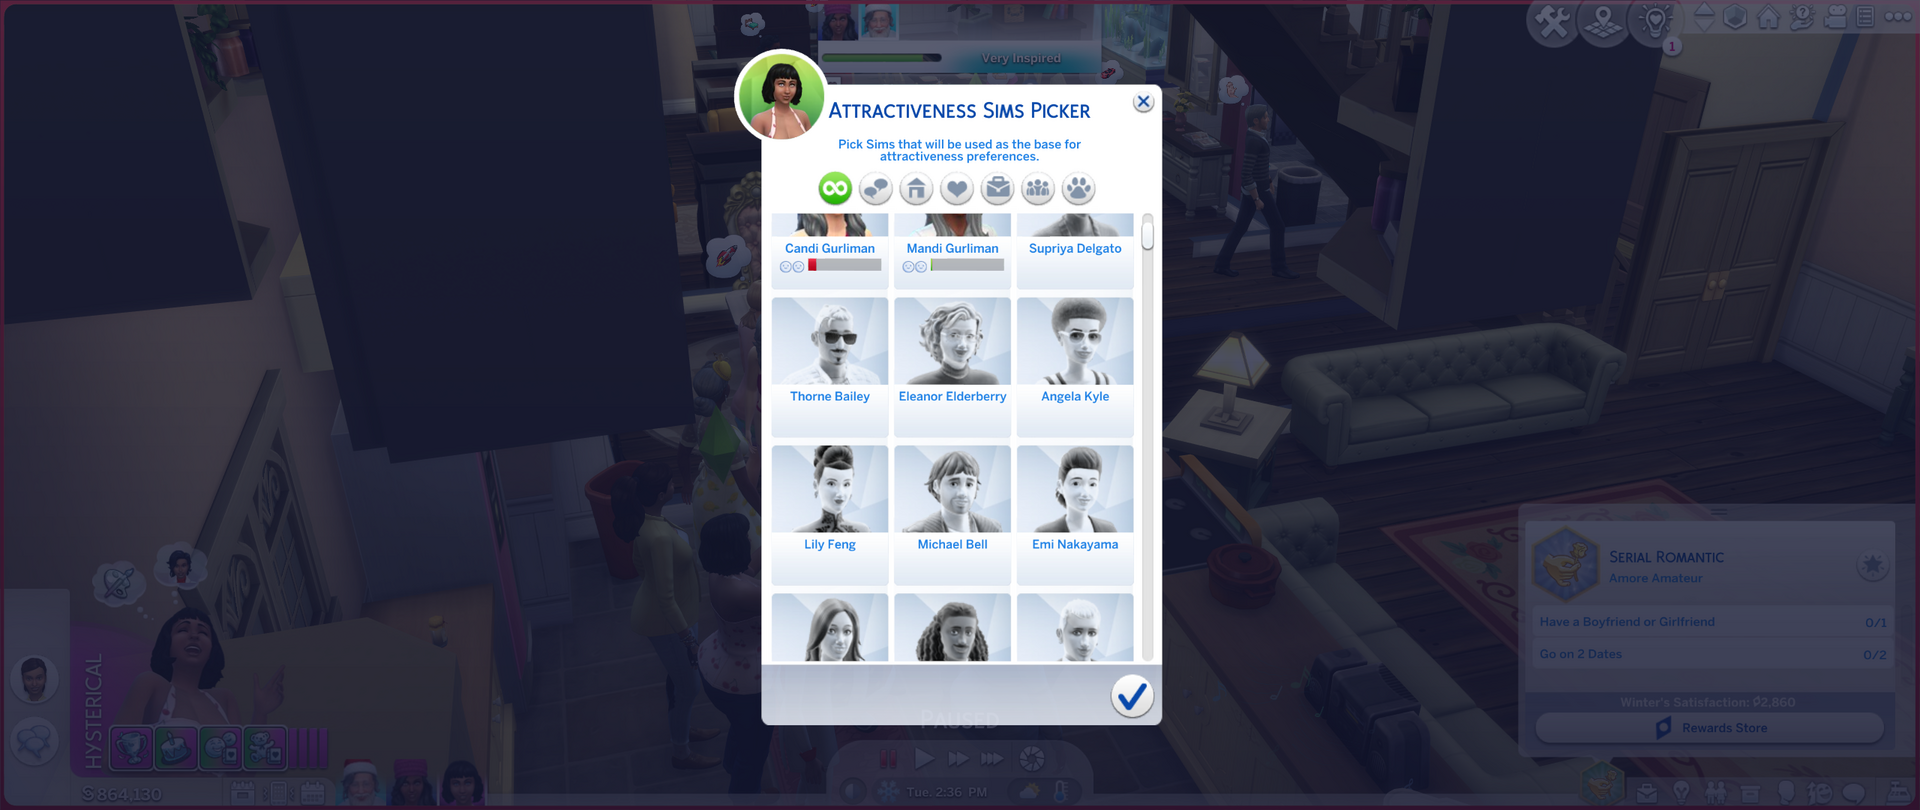 Share Your Most Fucked Up Sims Playthrough Page 2 The Sims 4